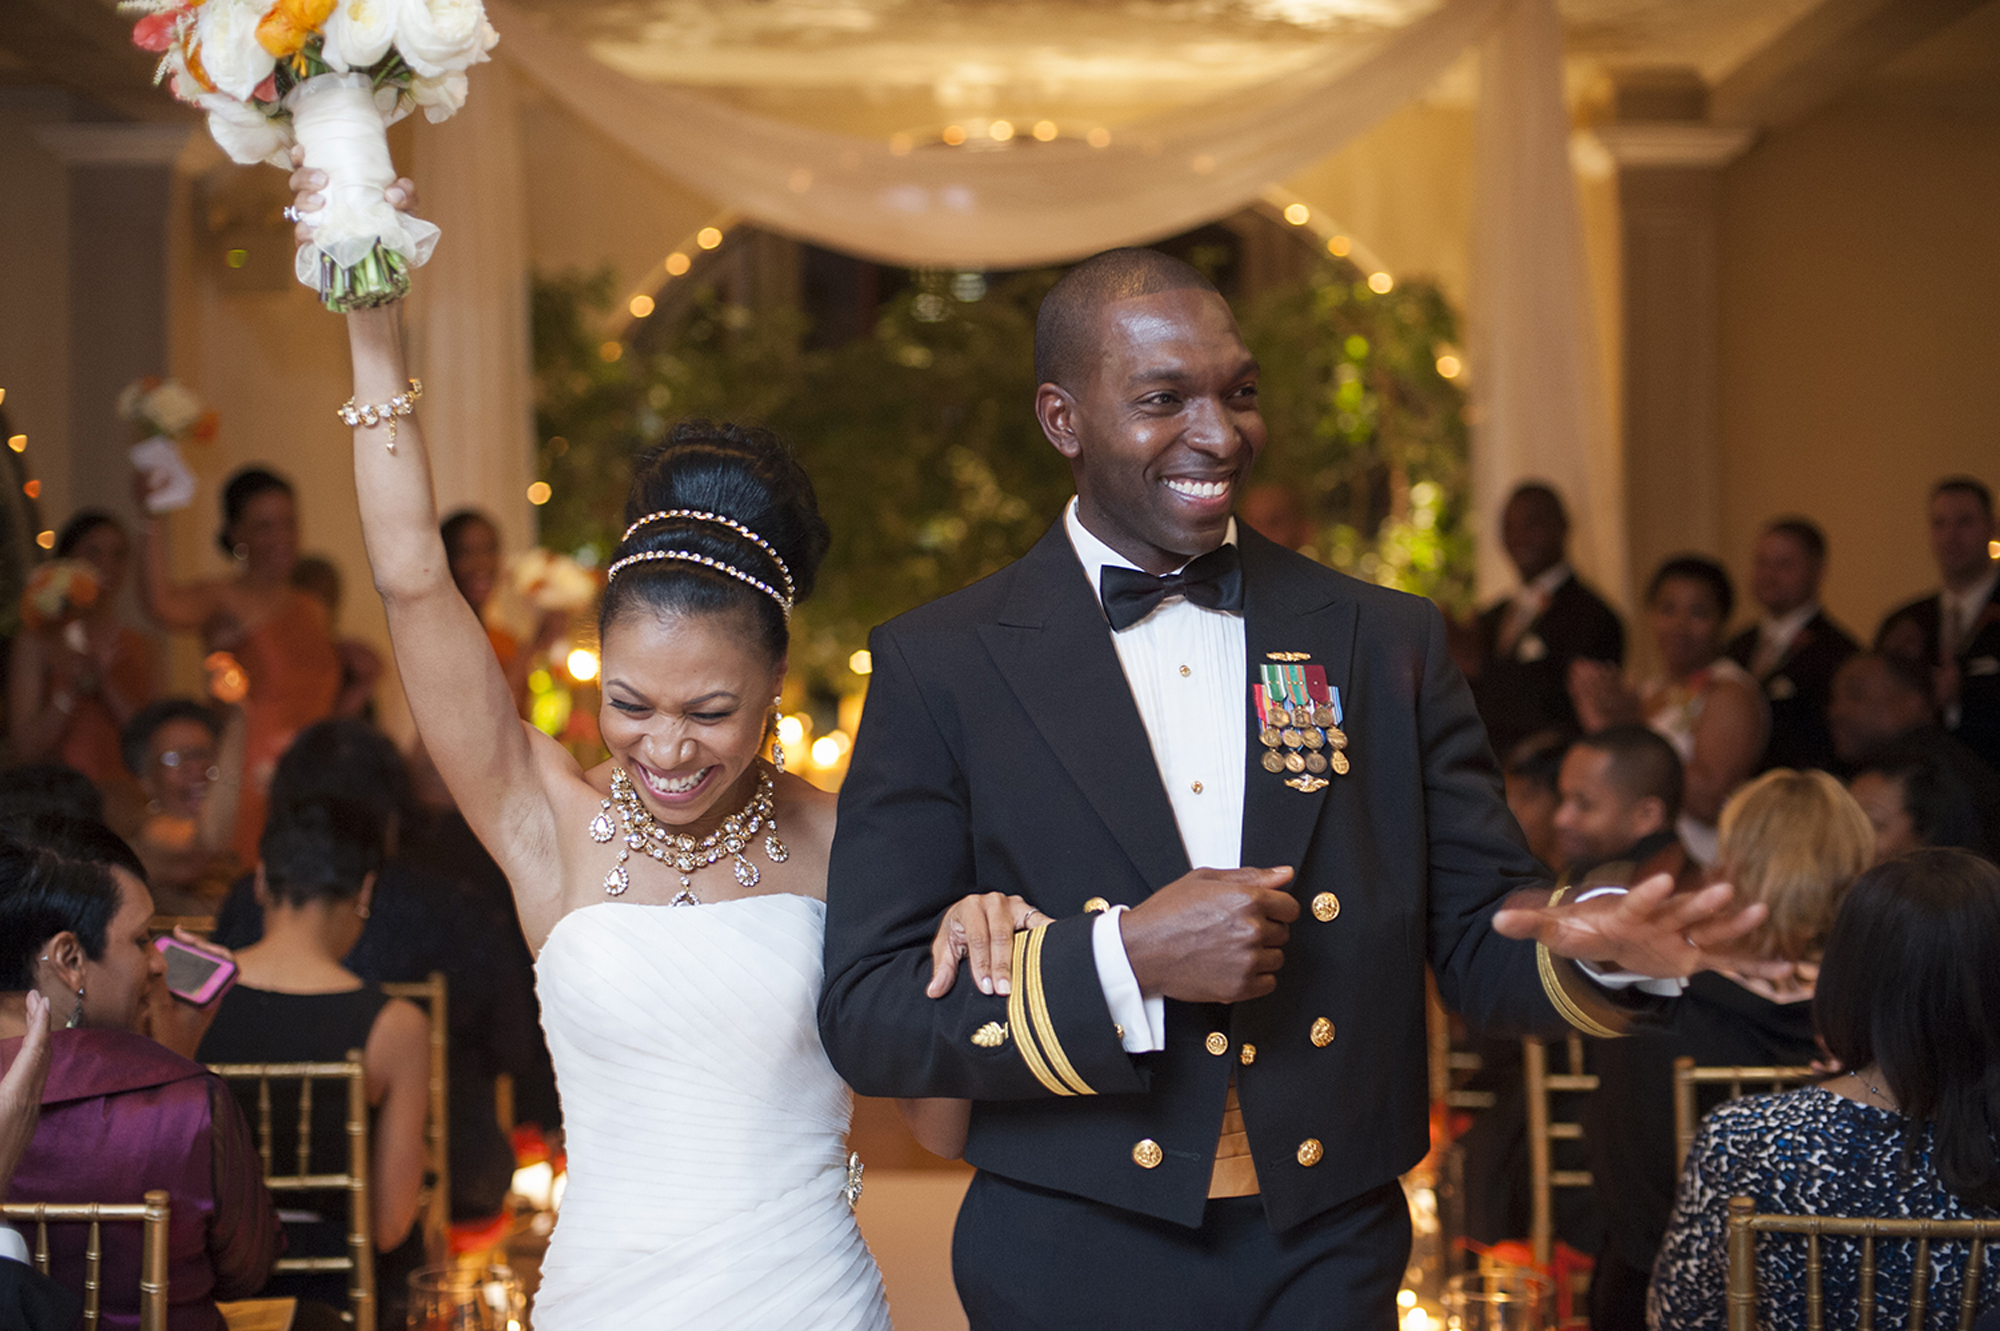 Black couple grinning as they walk down the aisle. Bride is raising up her bouquet and groom is wearing military dress.